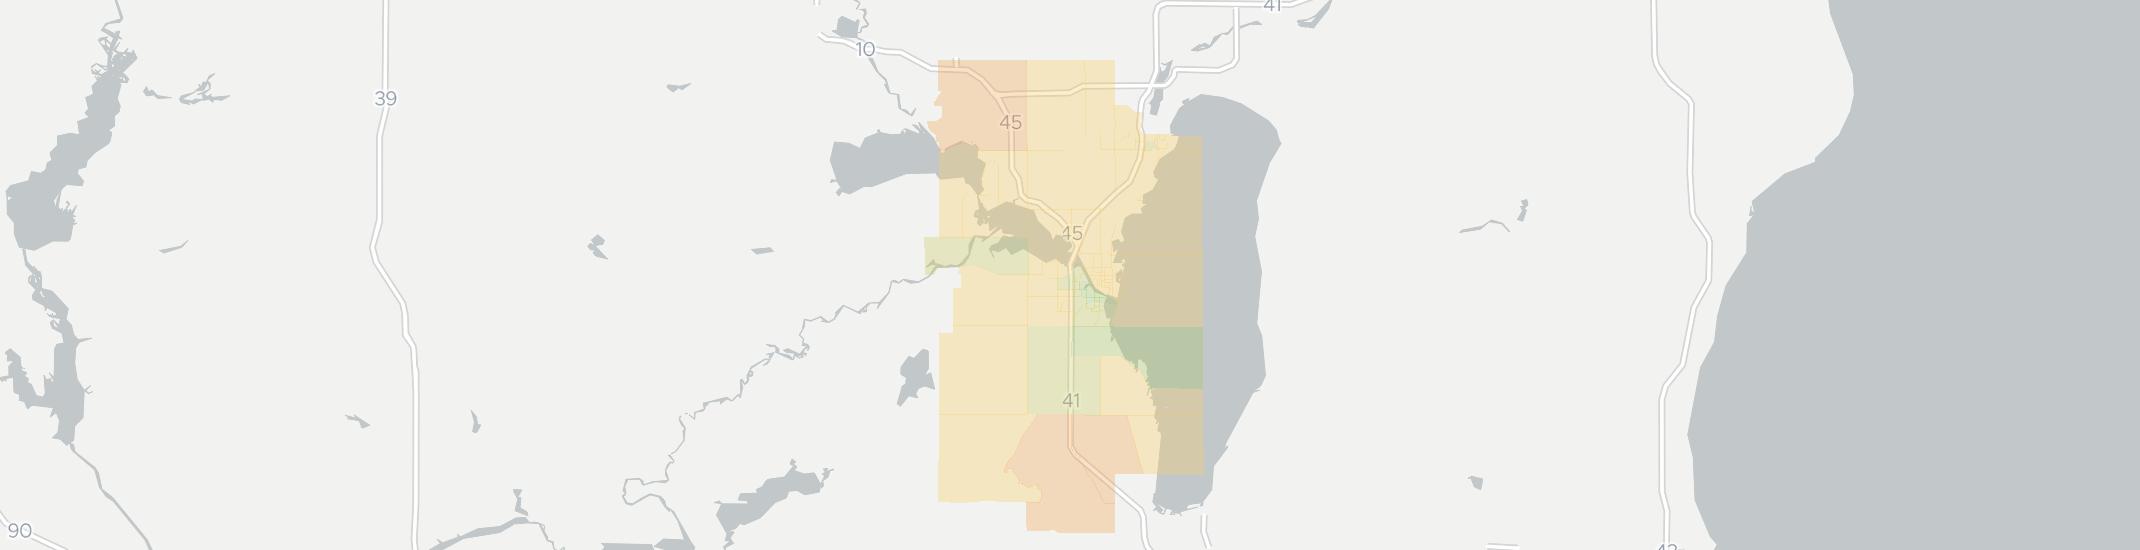 Oshkosh Internet Competition Map. Click for interactive map